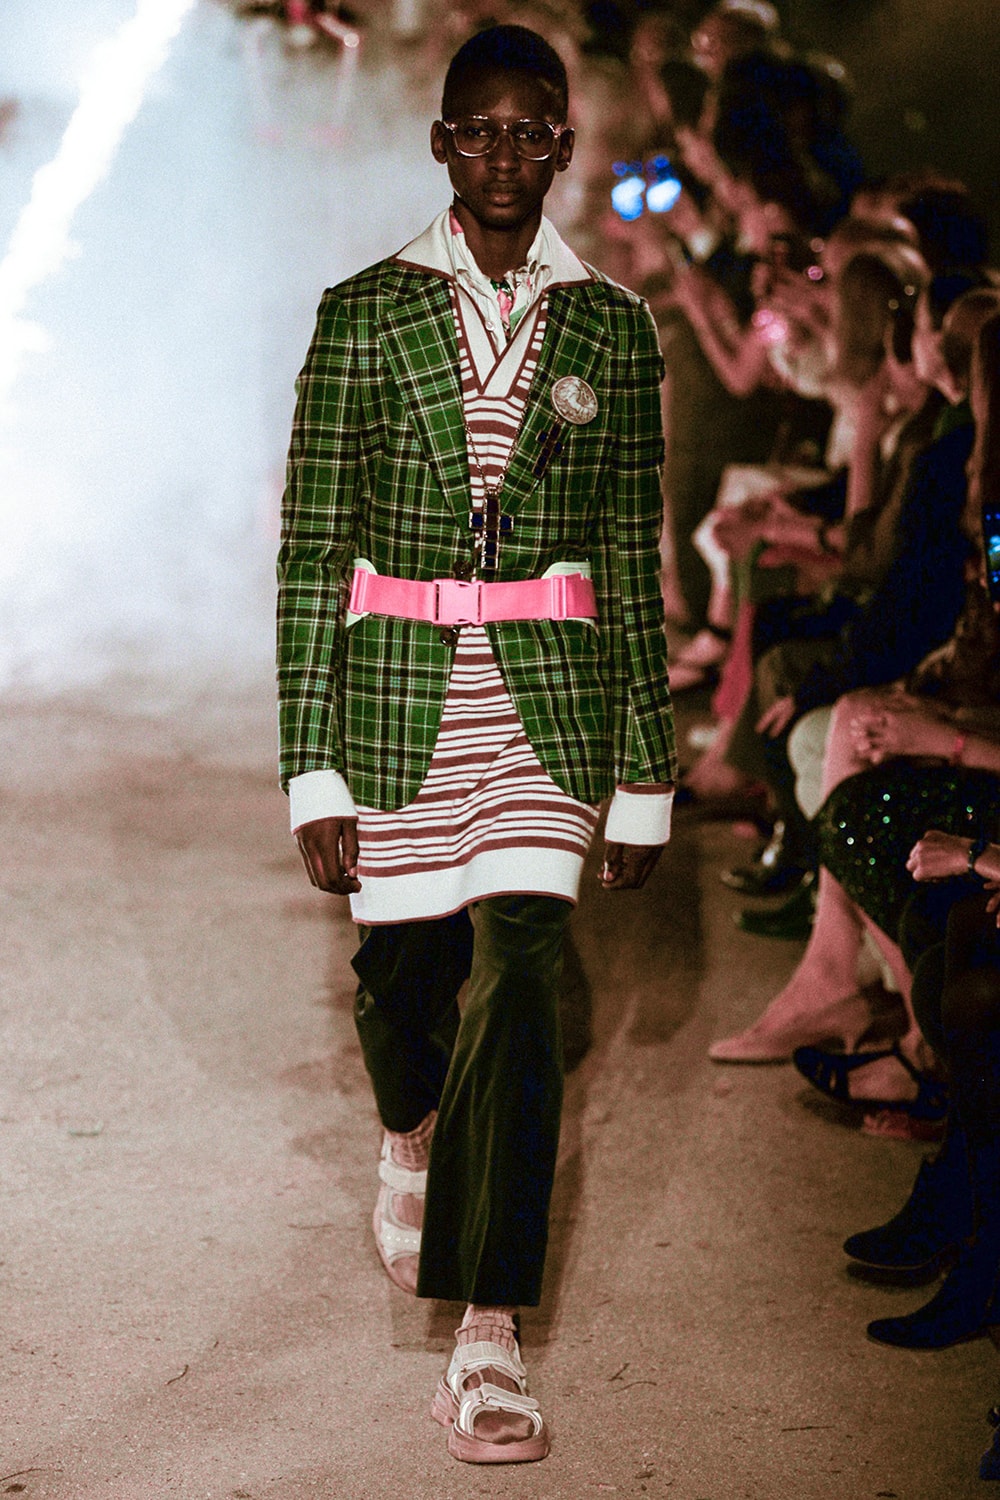 Gucci Resort 2019 Runway Collection Alyscamps Arles France Alessandro Michele runway